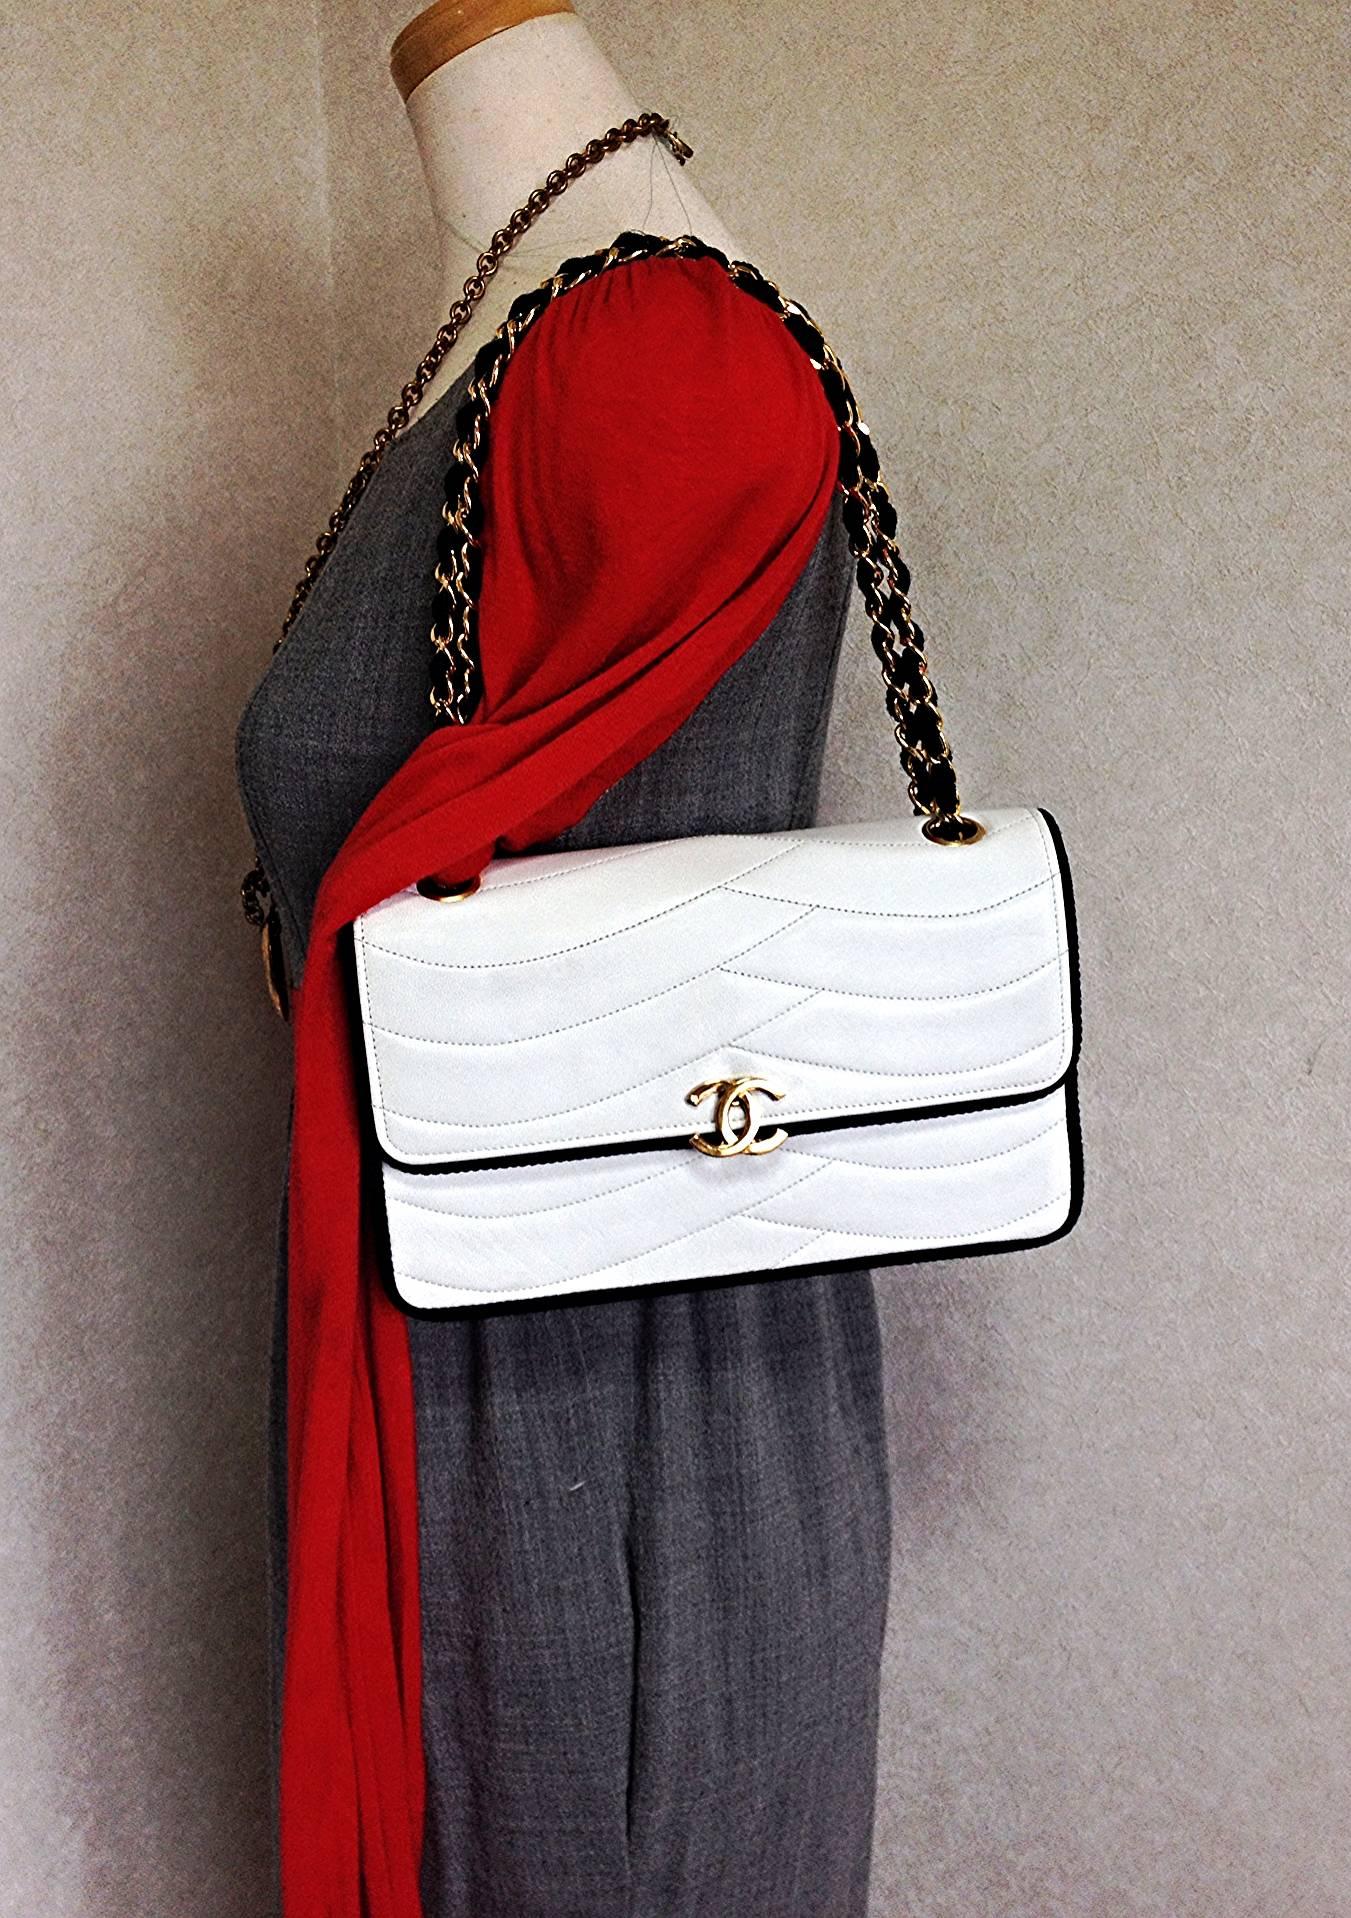 MINT. 80's rare vintage Chanel white 2.55 flap bag with navy rope and gold chain 1